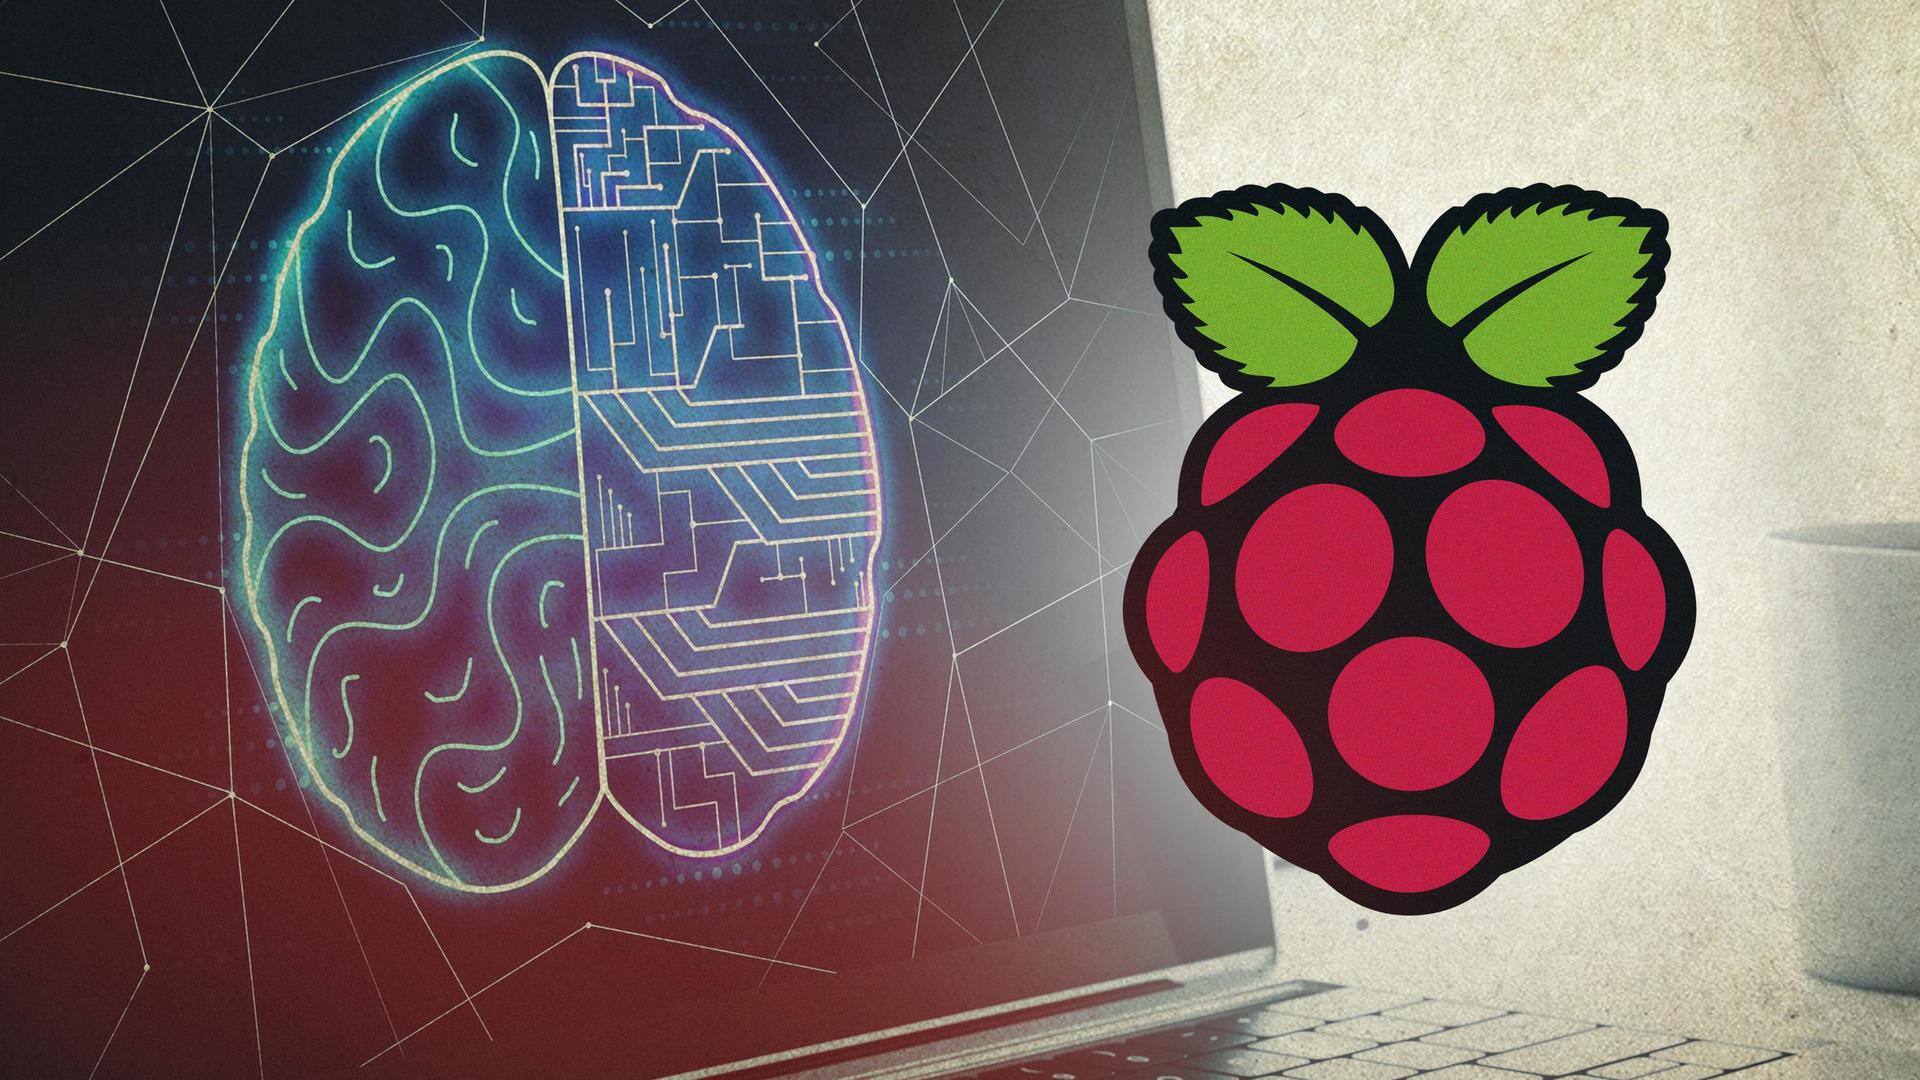 This Raspberry Pi-based device lets you control computers with brain